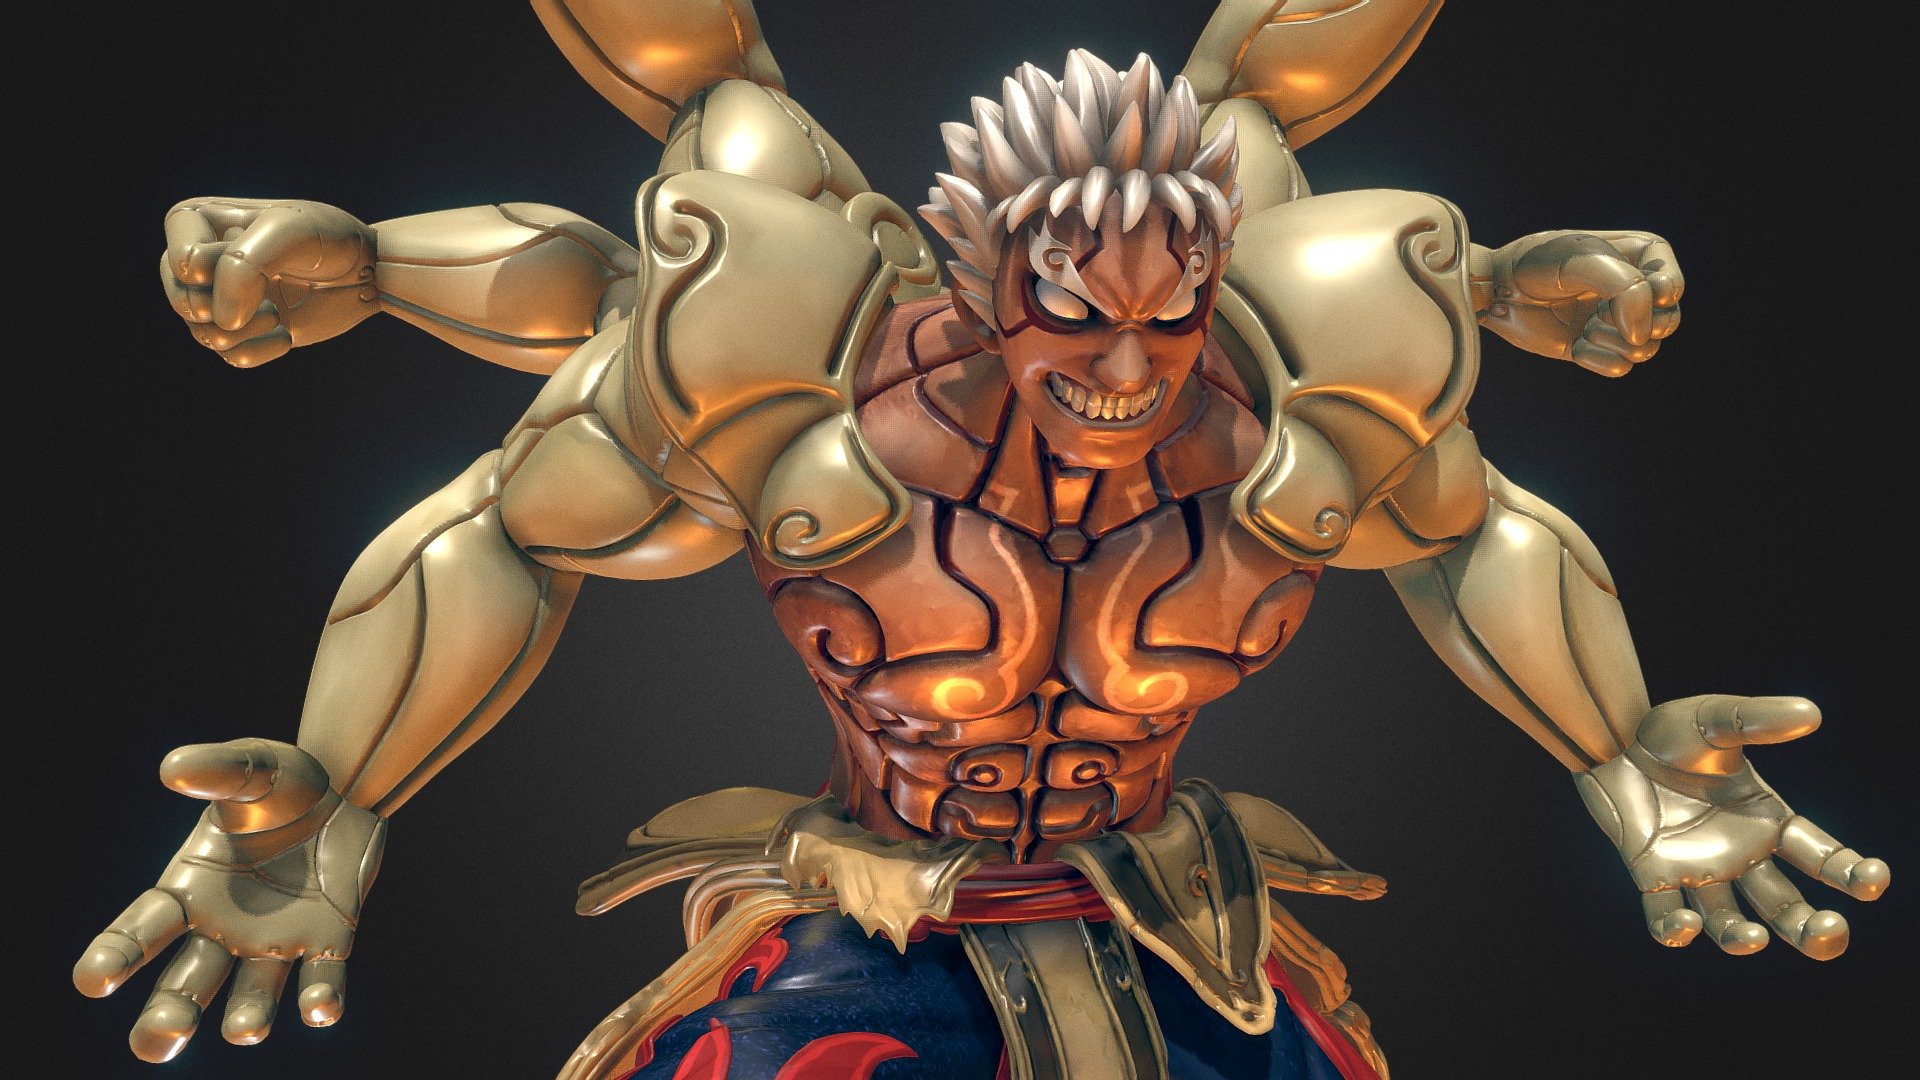 Asura - Digital Figure Sculpture

Fan art that I did for Asura's Wrath game.
Ideal for 3D Printing 3d model